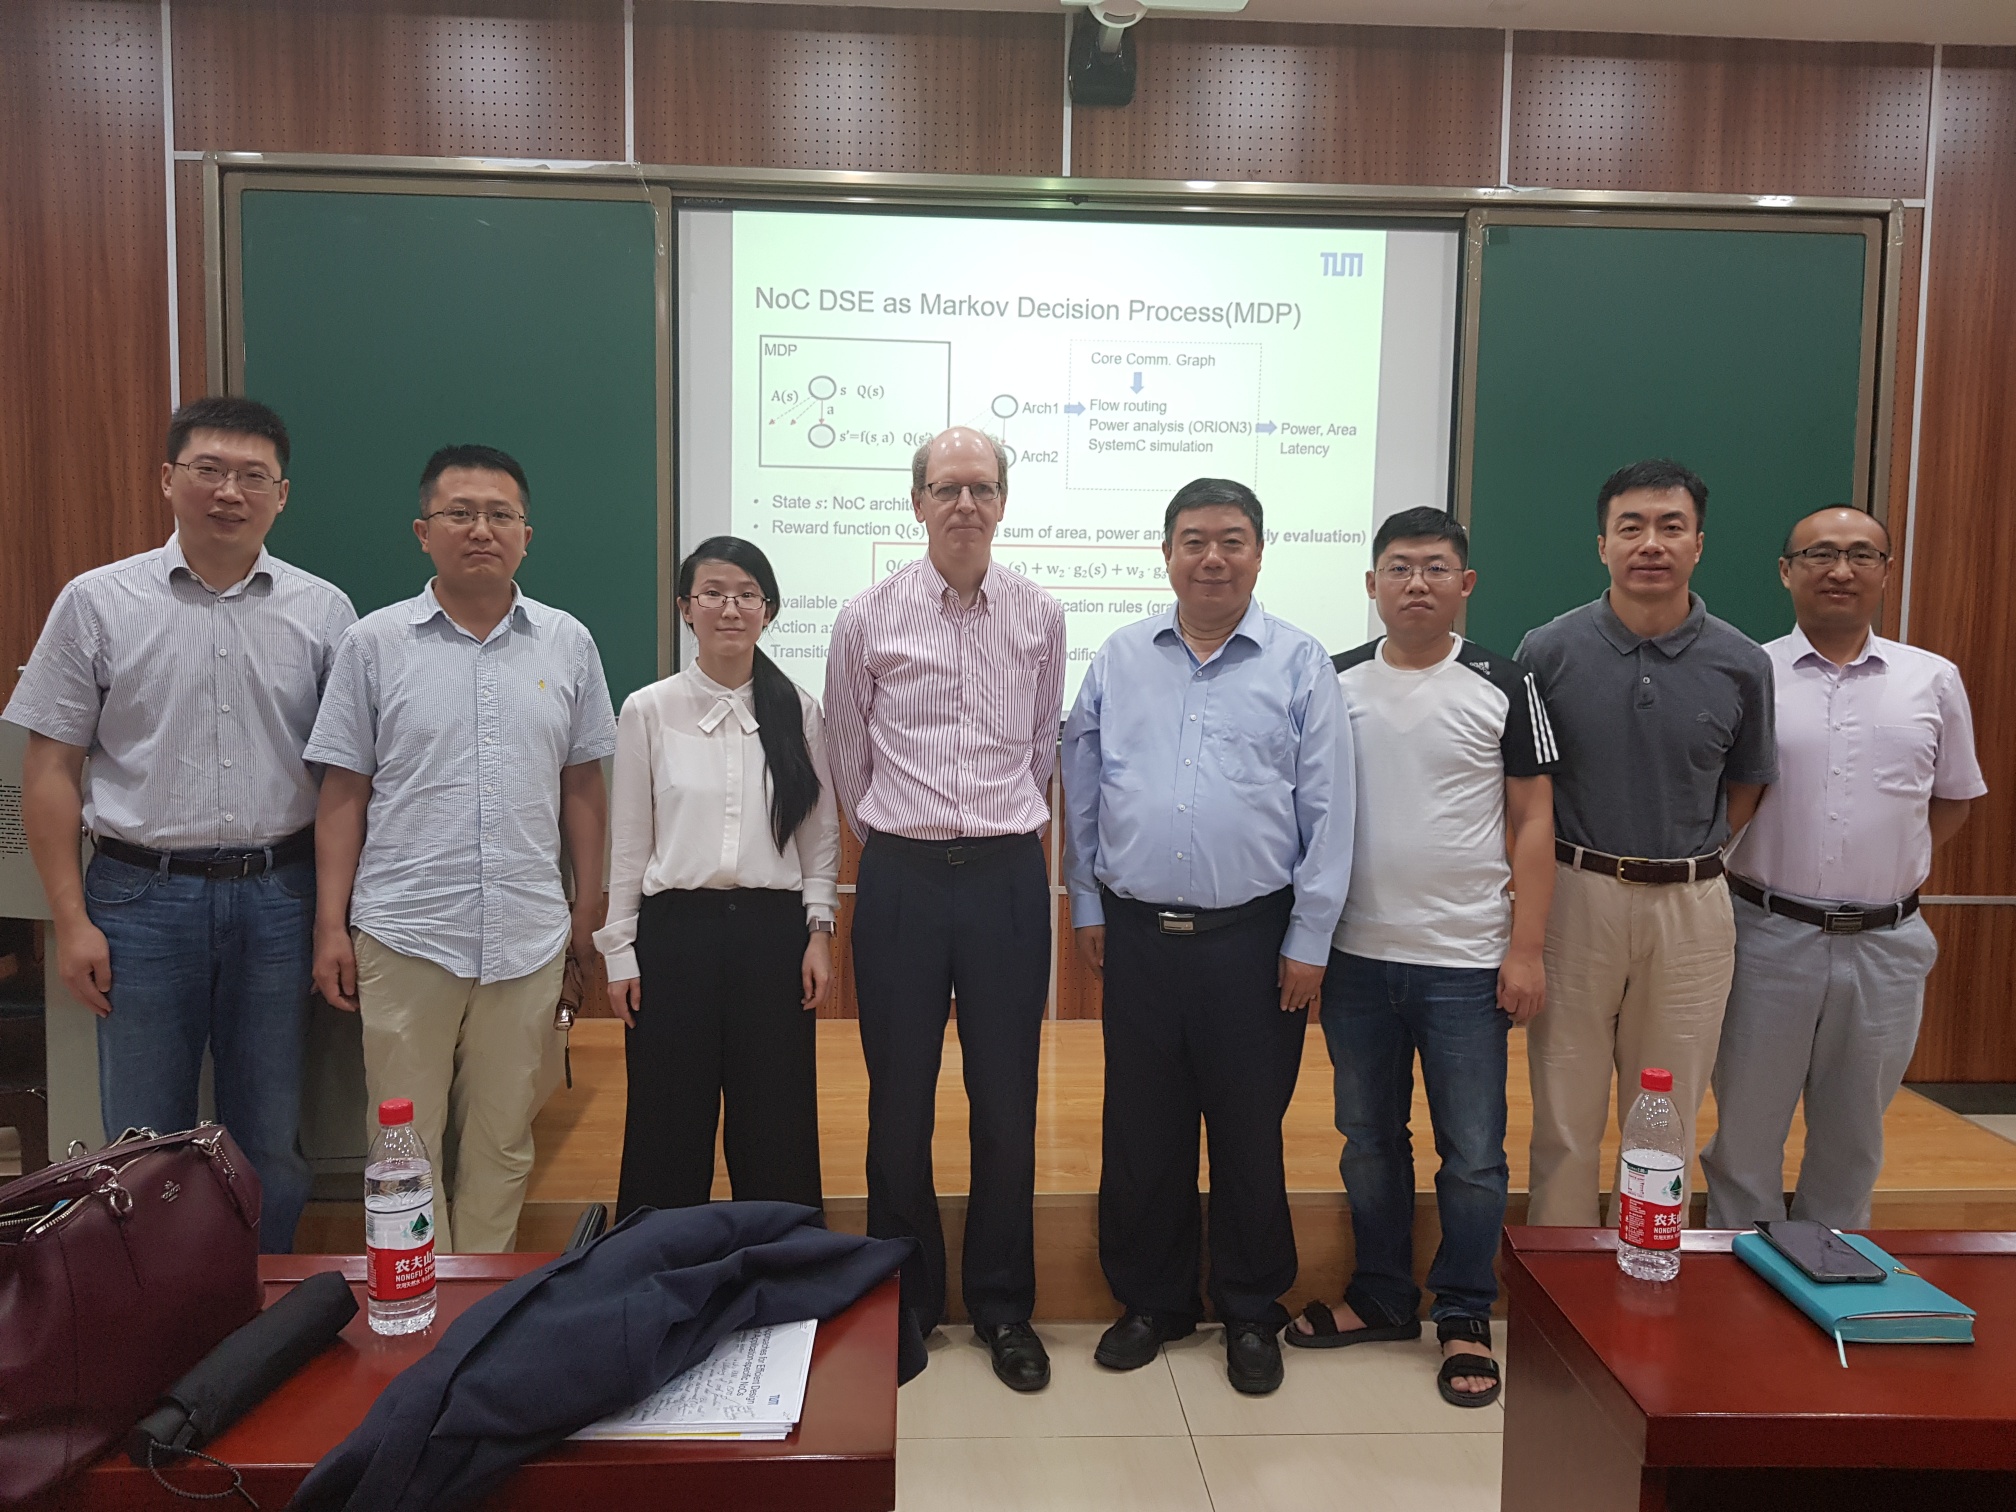 The photo shows Li Zhang and Ulf Schlichtmann together with Prof. Yintang Yang, Vice President of Xidian University, with some of his colleagues.